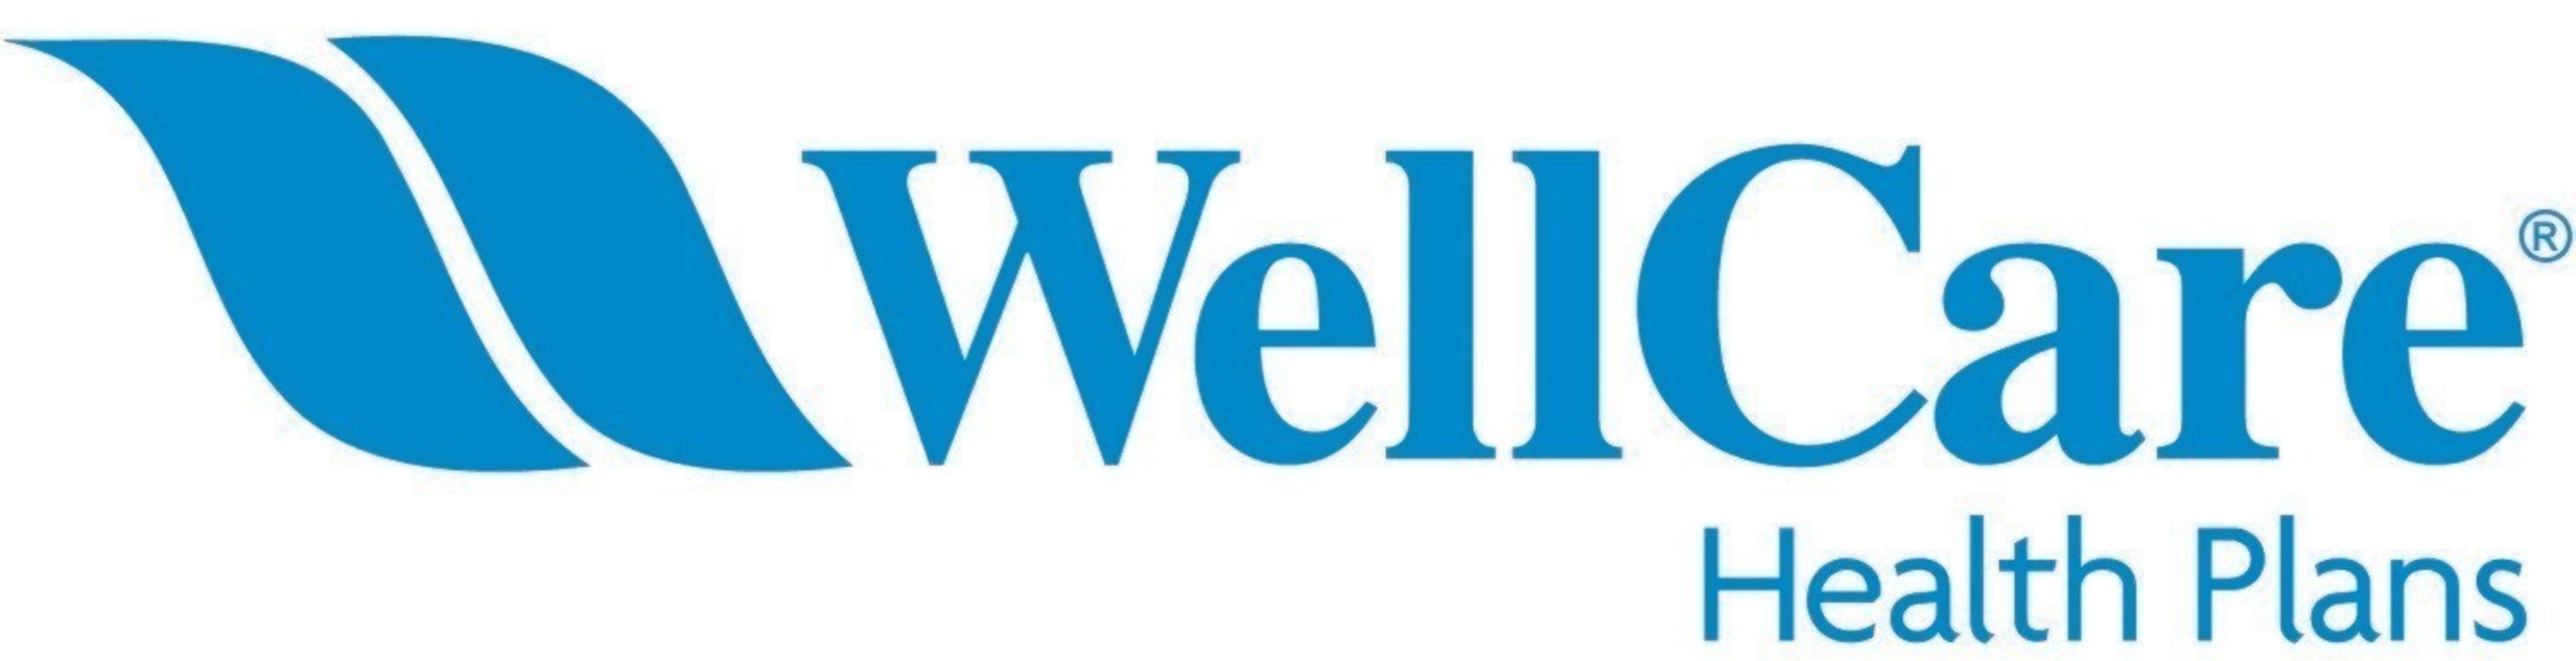 wellcare to acquire universal american corp.